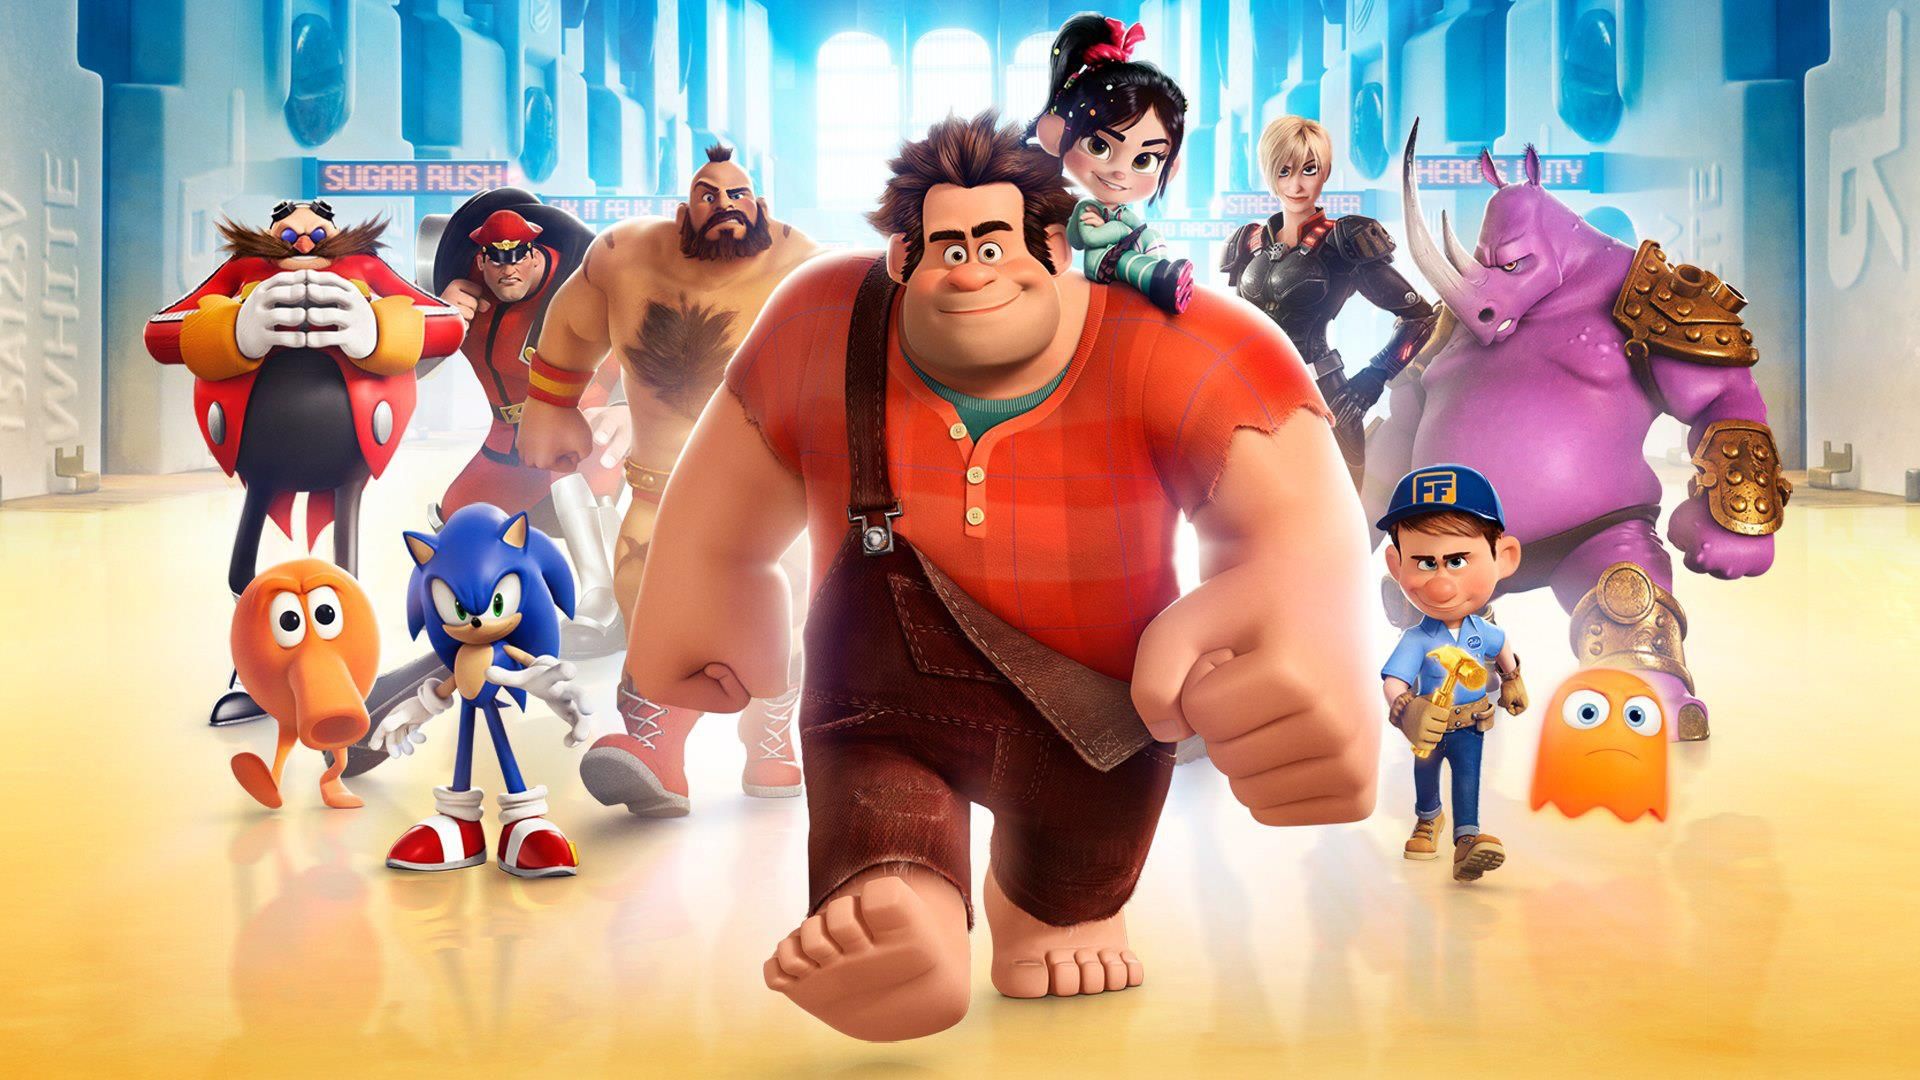 John C. Reilly Confirms 'Wreck-It Ralph 2' is Happening